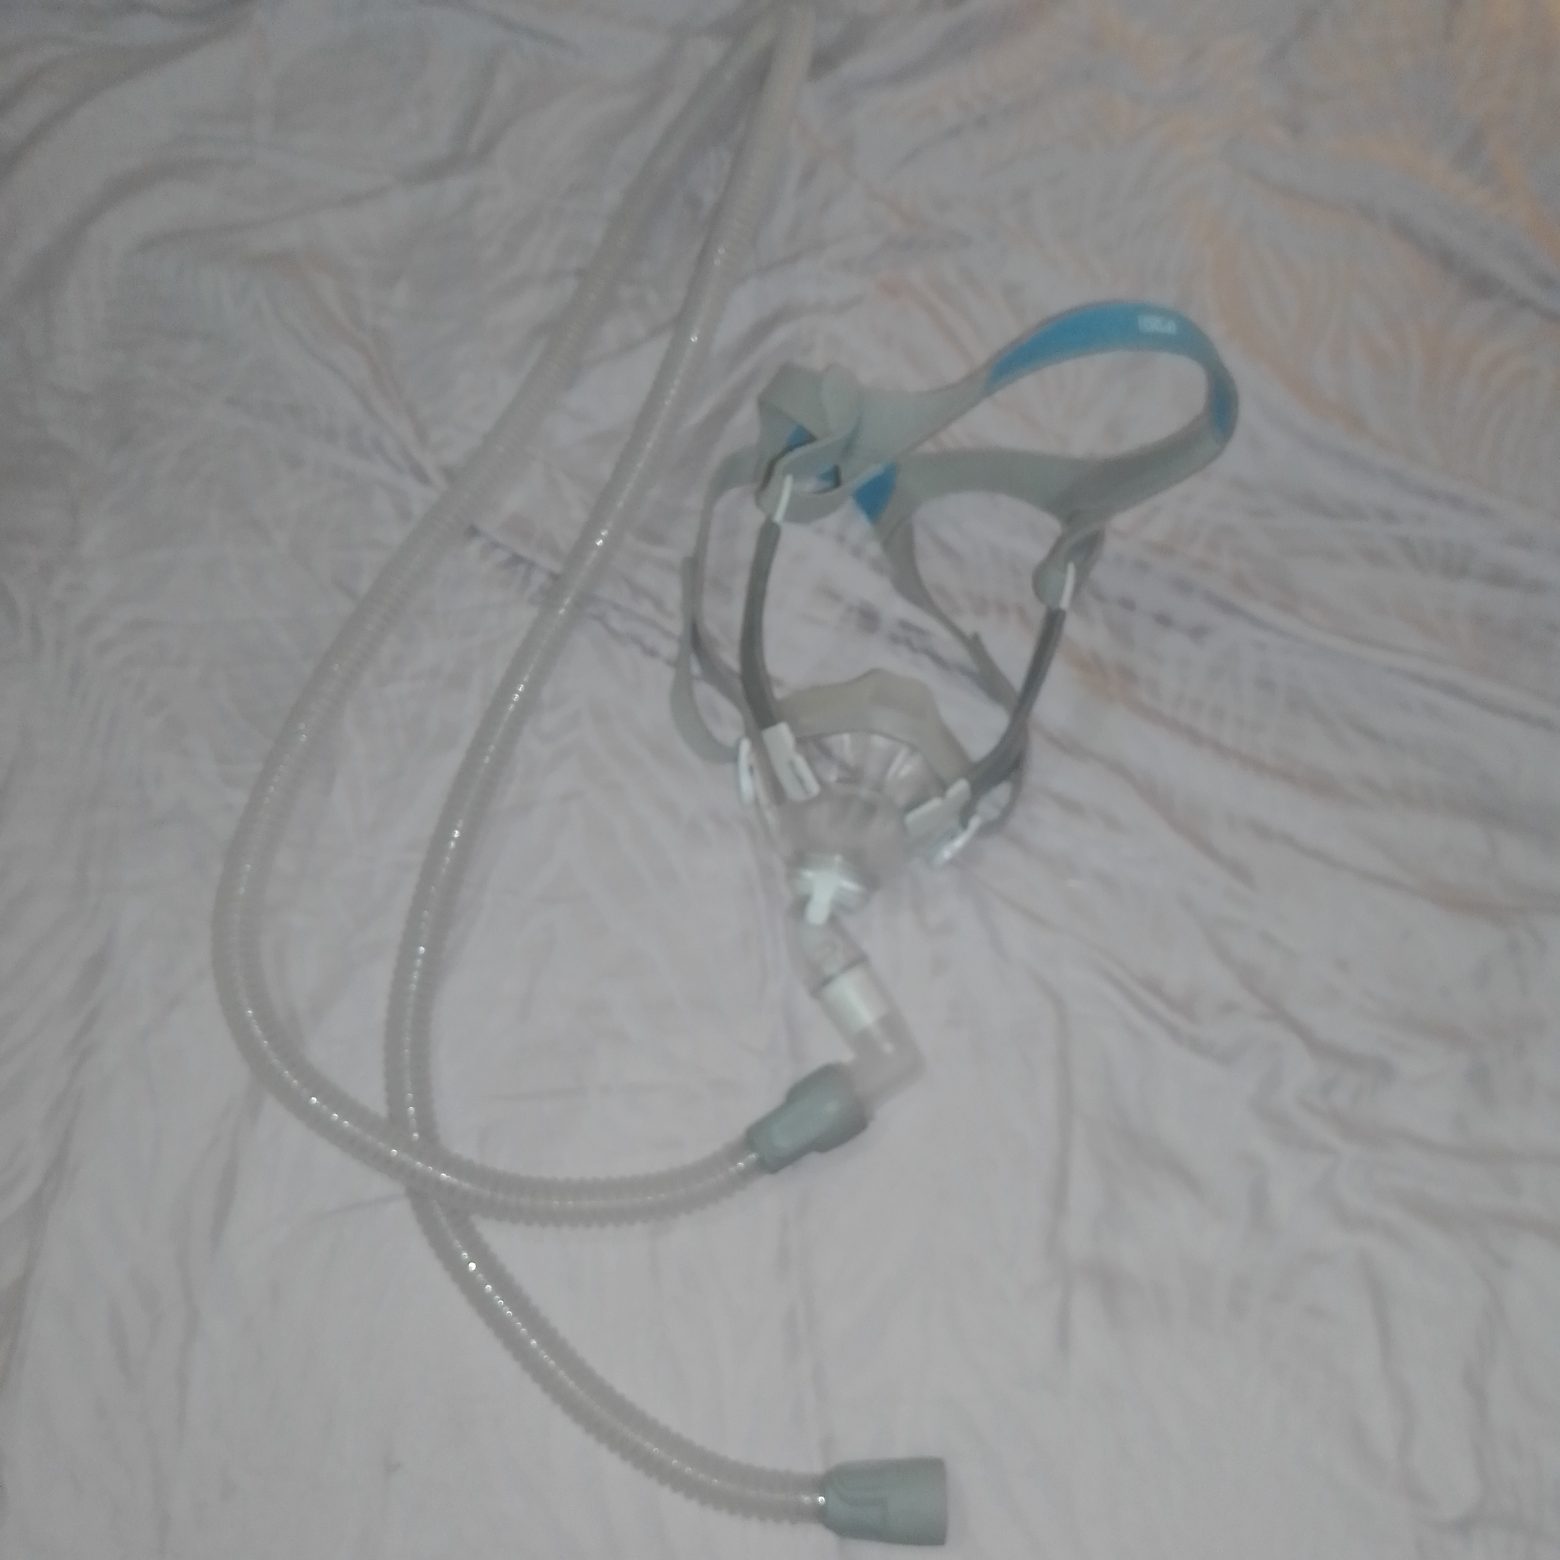 NEW CPAP STILL PERFECT CONDITION & CHEAP